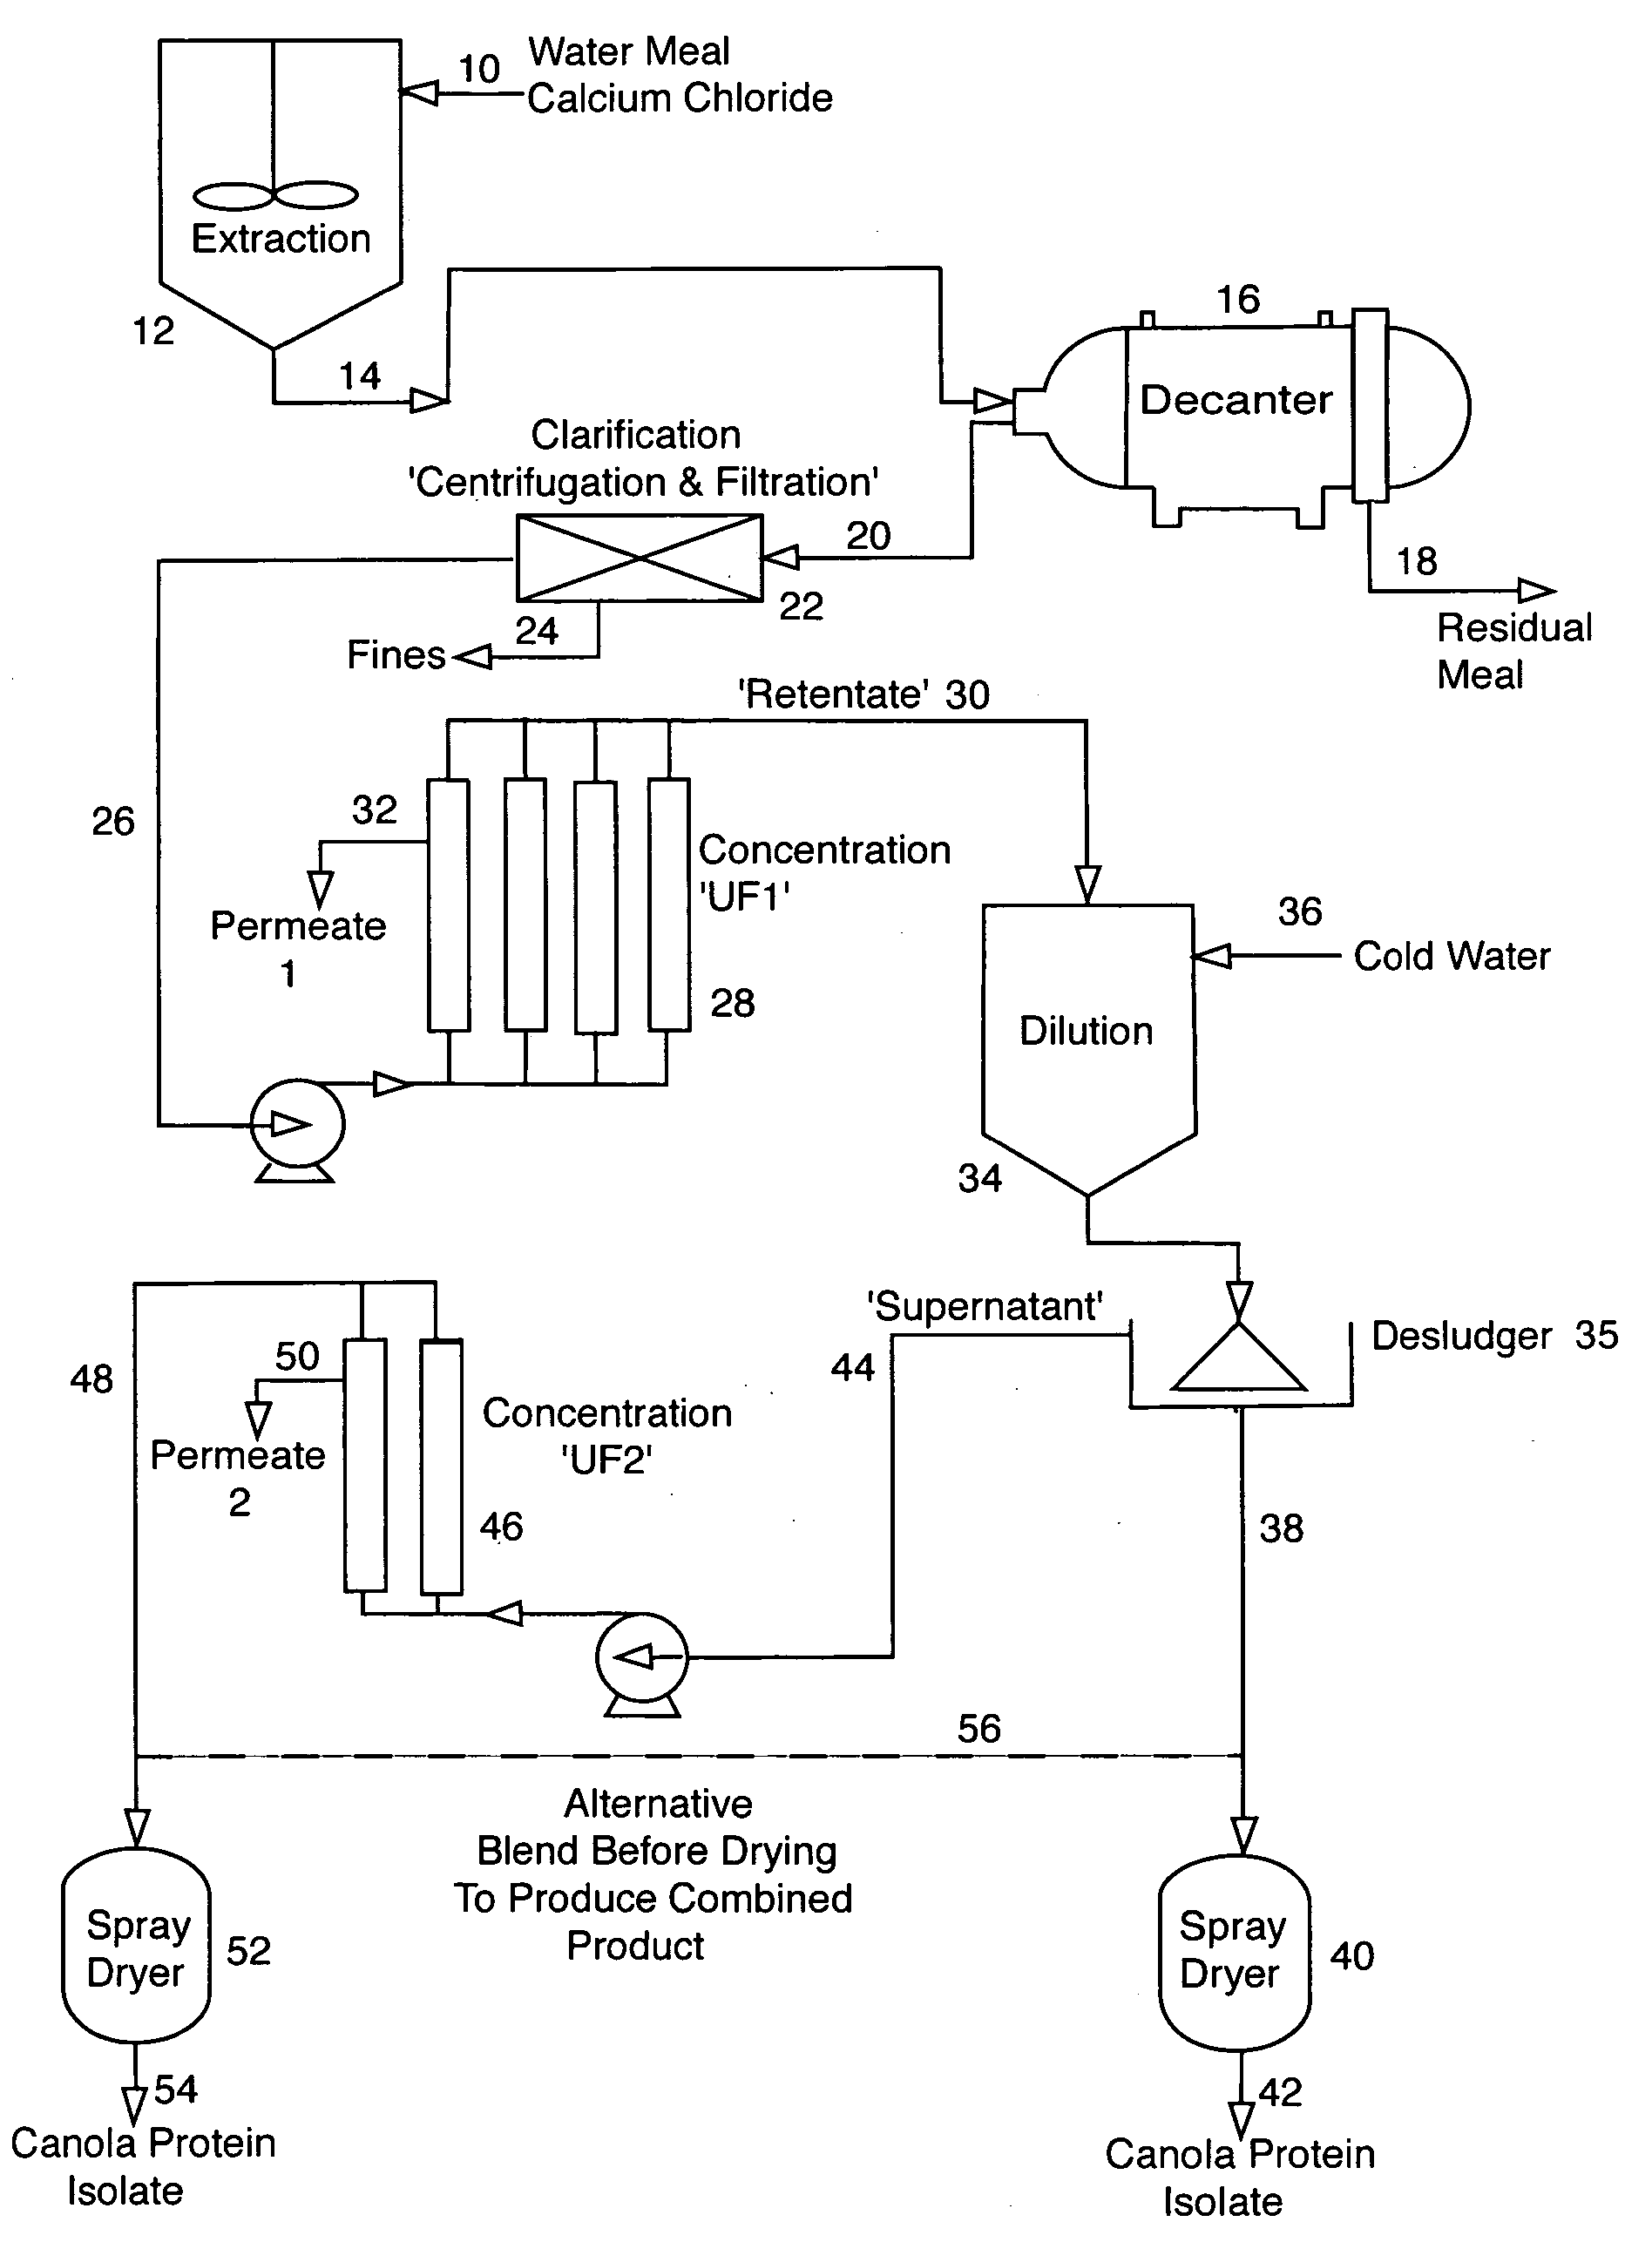 Protein isolation procedures for reducing phytic acid